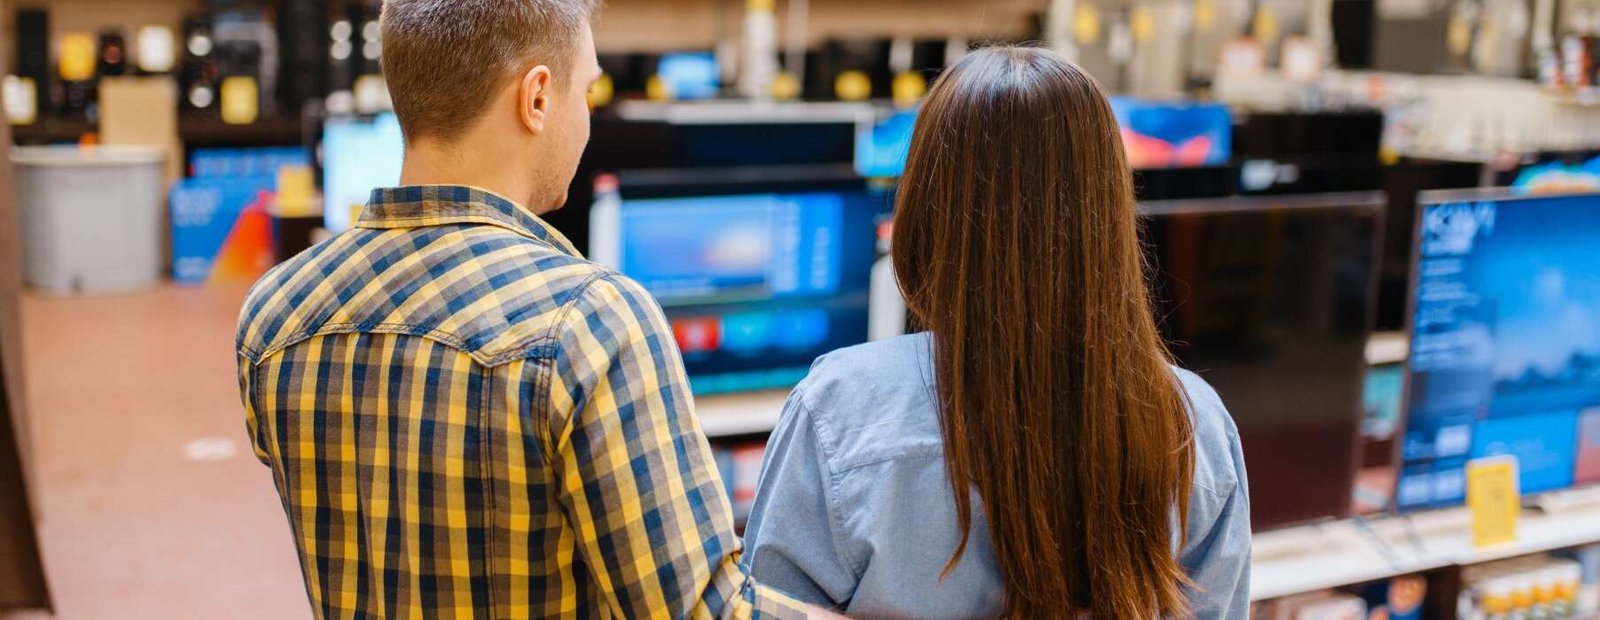 Family couple choosing TV in electronics store. Man and woman buying home electrical appliances in market